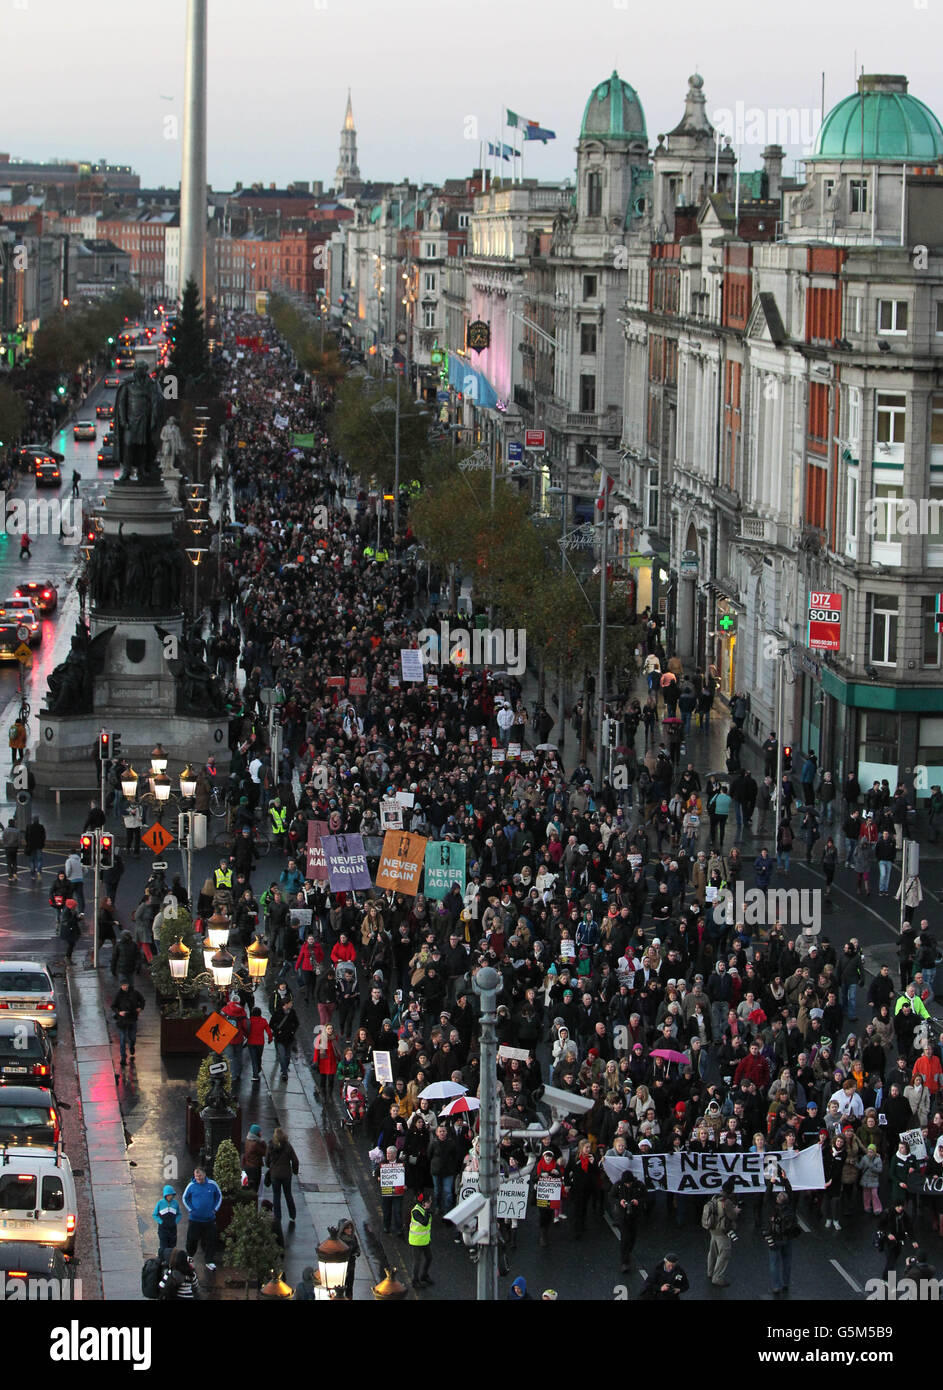 People march down O'Connell Street, Dublin, to demand legislation on abortion after the death of Indian woman Savita Halappanavar. Stock Photo